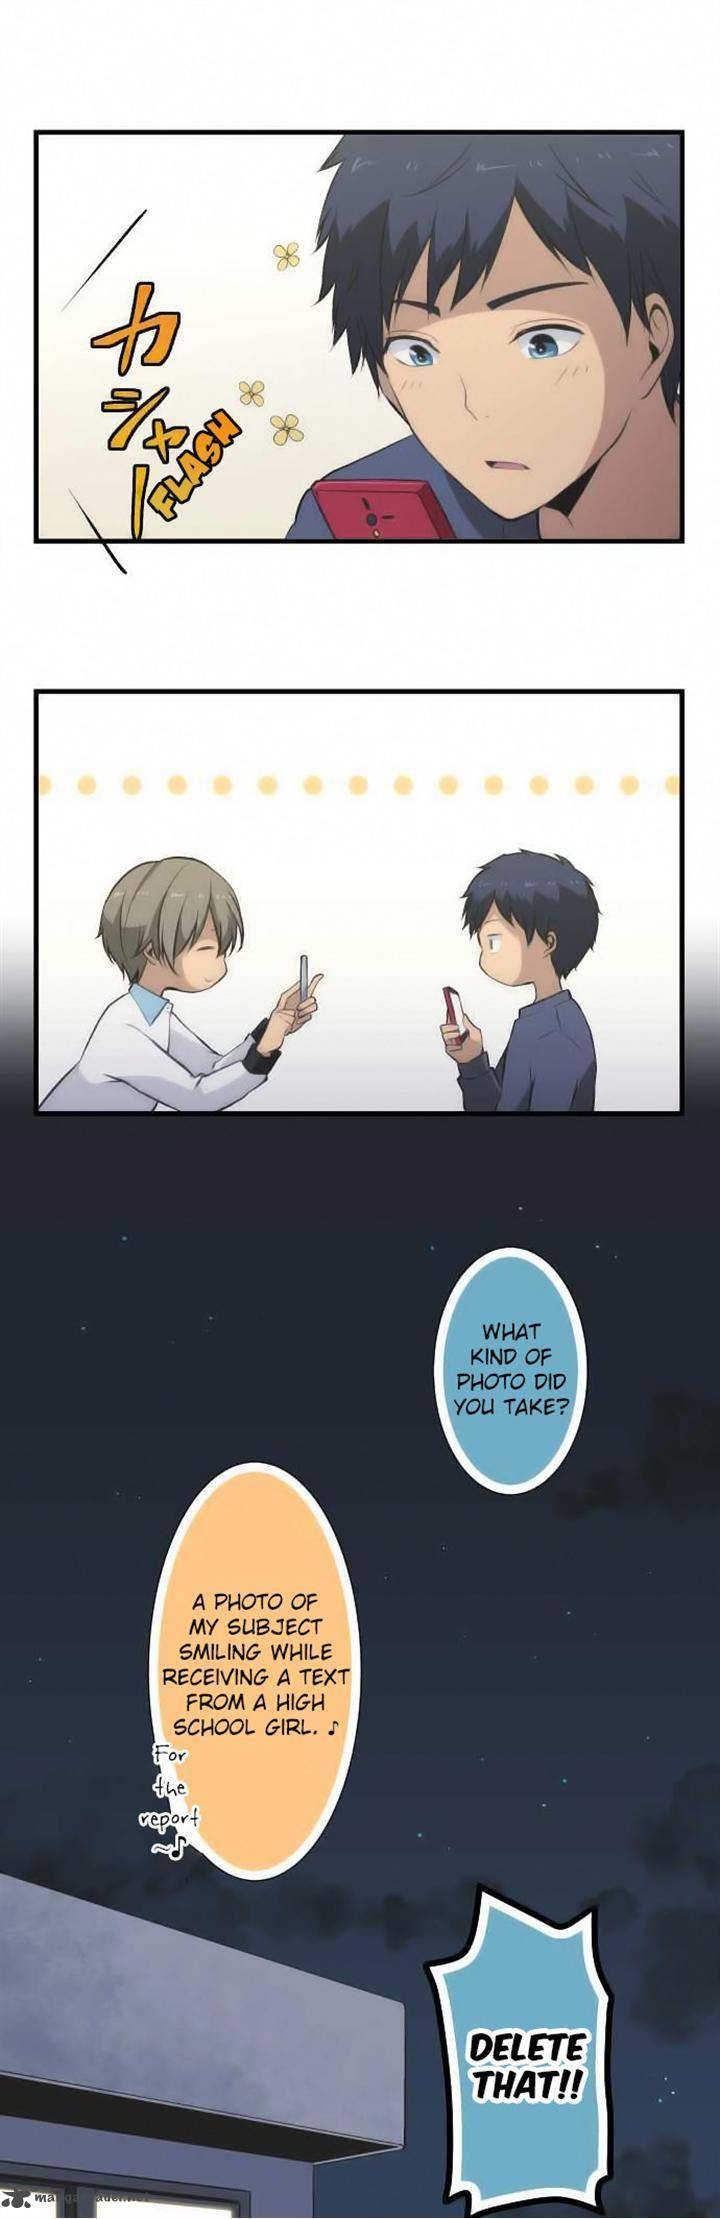 Relife 44 2